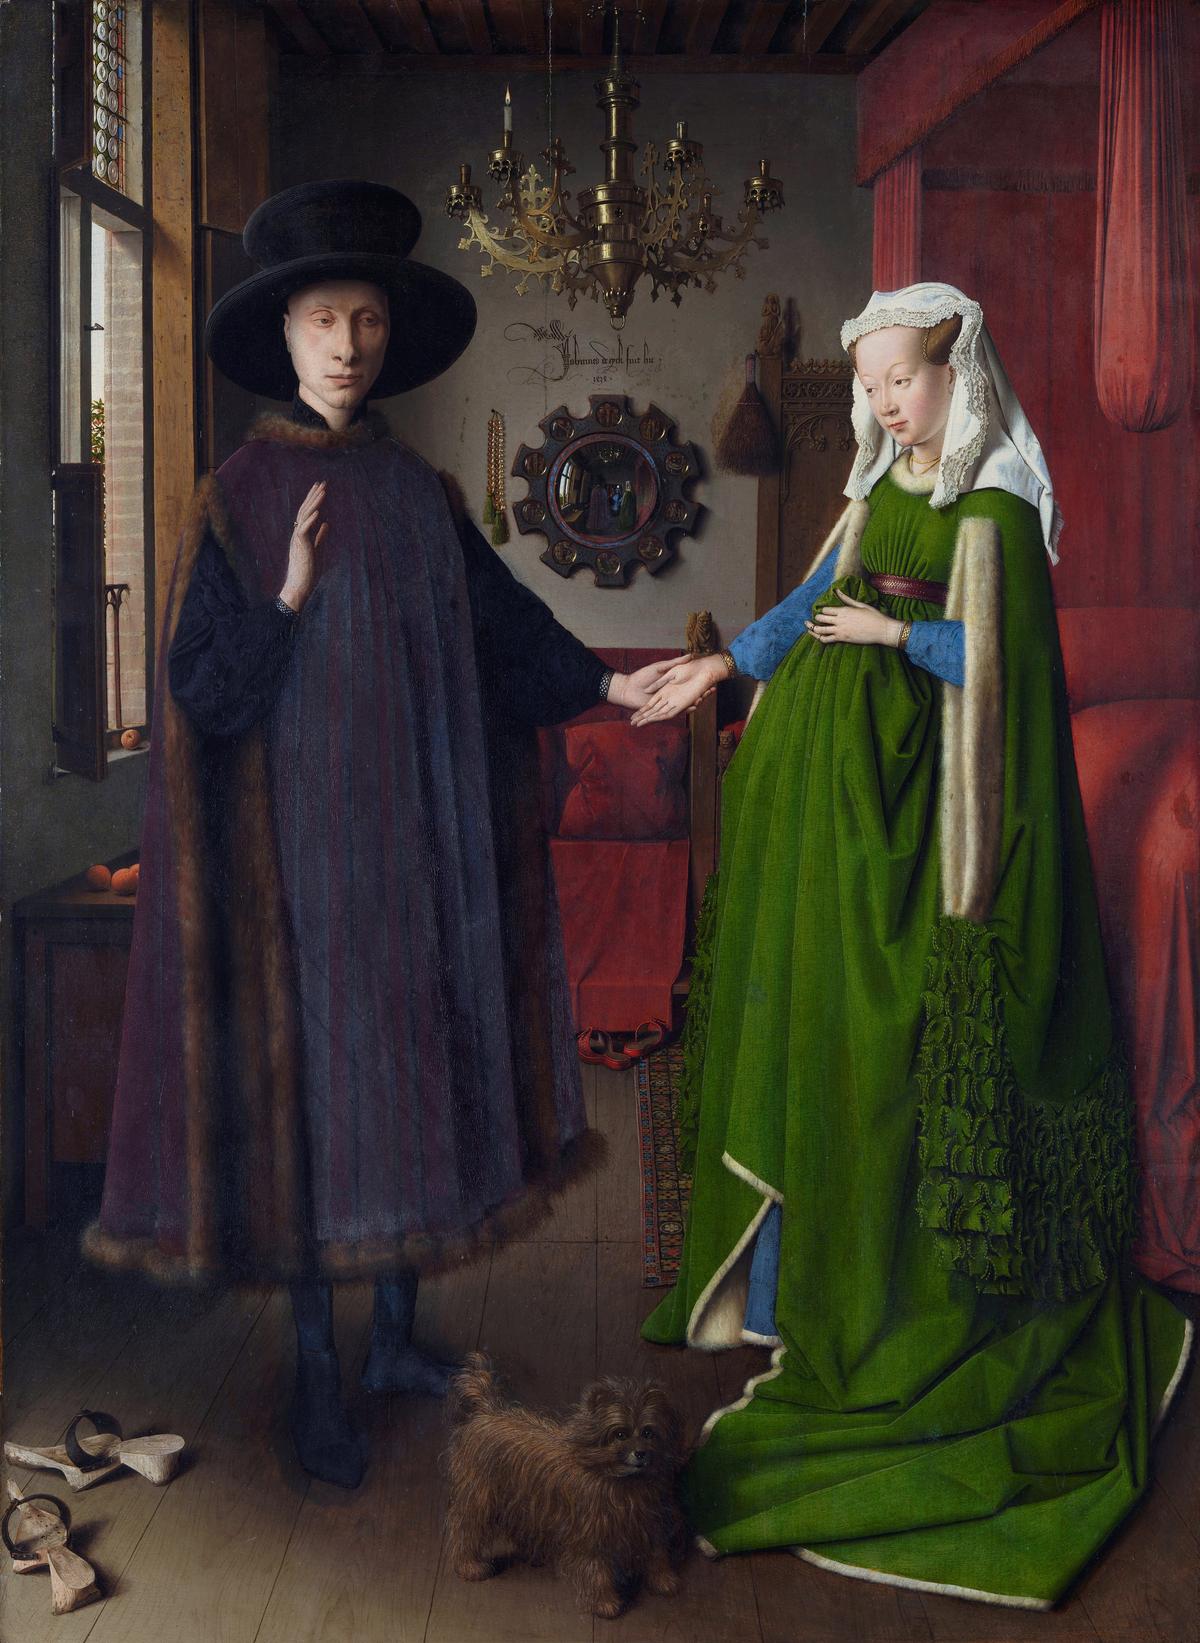 “The Arnolfini Portrait,” 1434, by Jan van Eyck. Oil on oak panel of 3 vertical boards; 32.4 inches by 23.6 inches. National Gallery, London. (Public Domain)